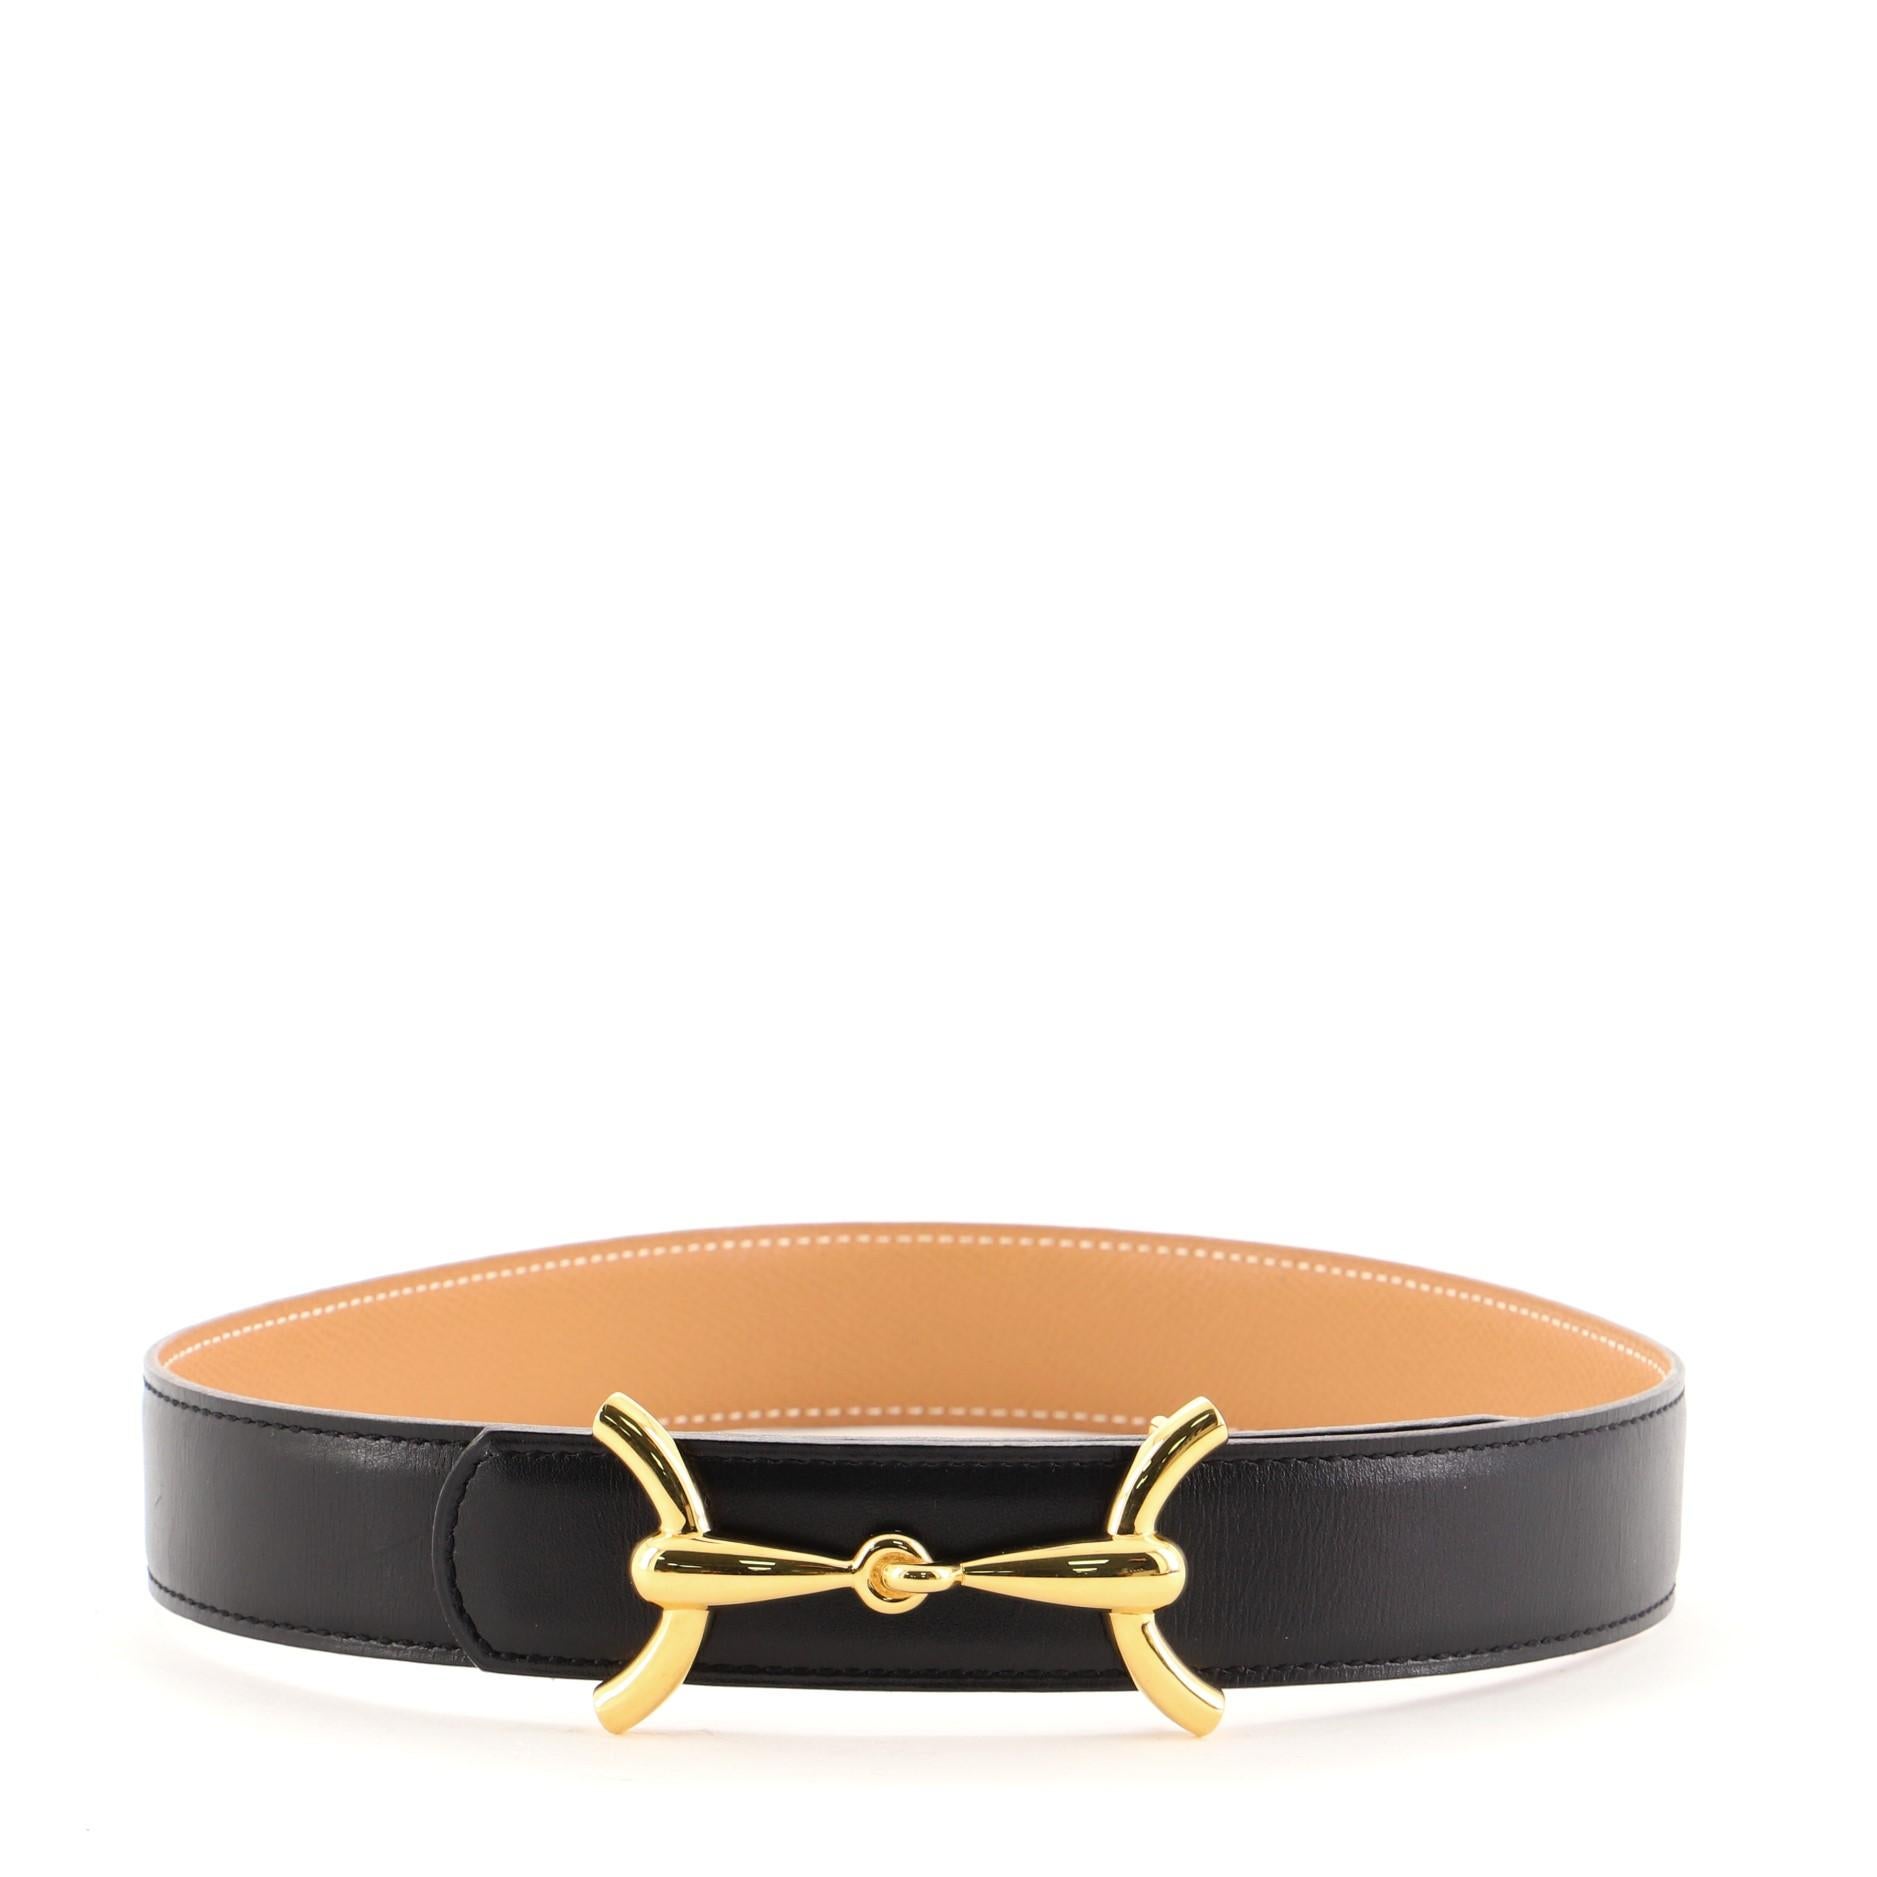 Hermes Horsebit Reversible Belt Leather Medium
Black Leather Gold

Condition Details: Creasing and scuffs on exterior, peeling and cracking on wax edges, scratches on hardware.

50529MSC

Height 26